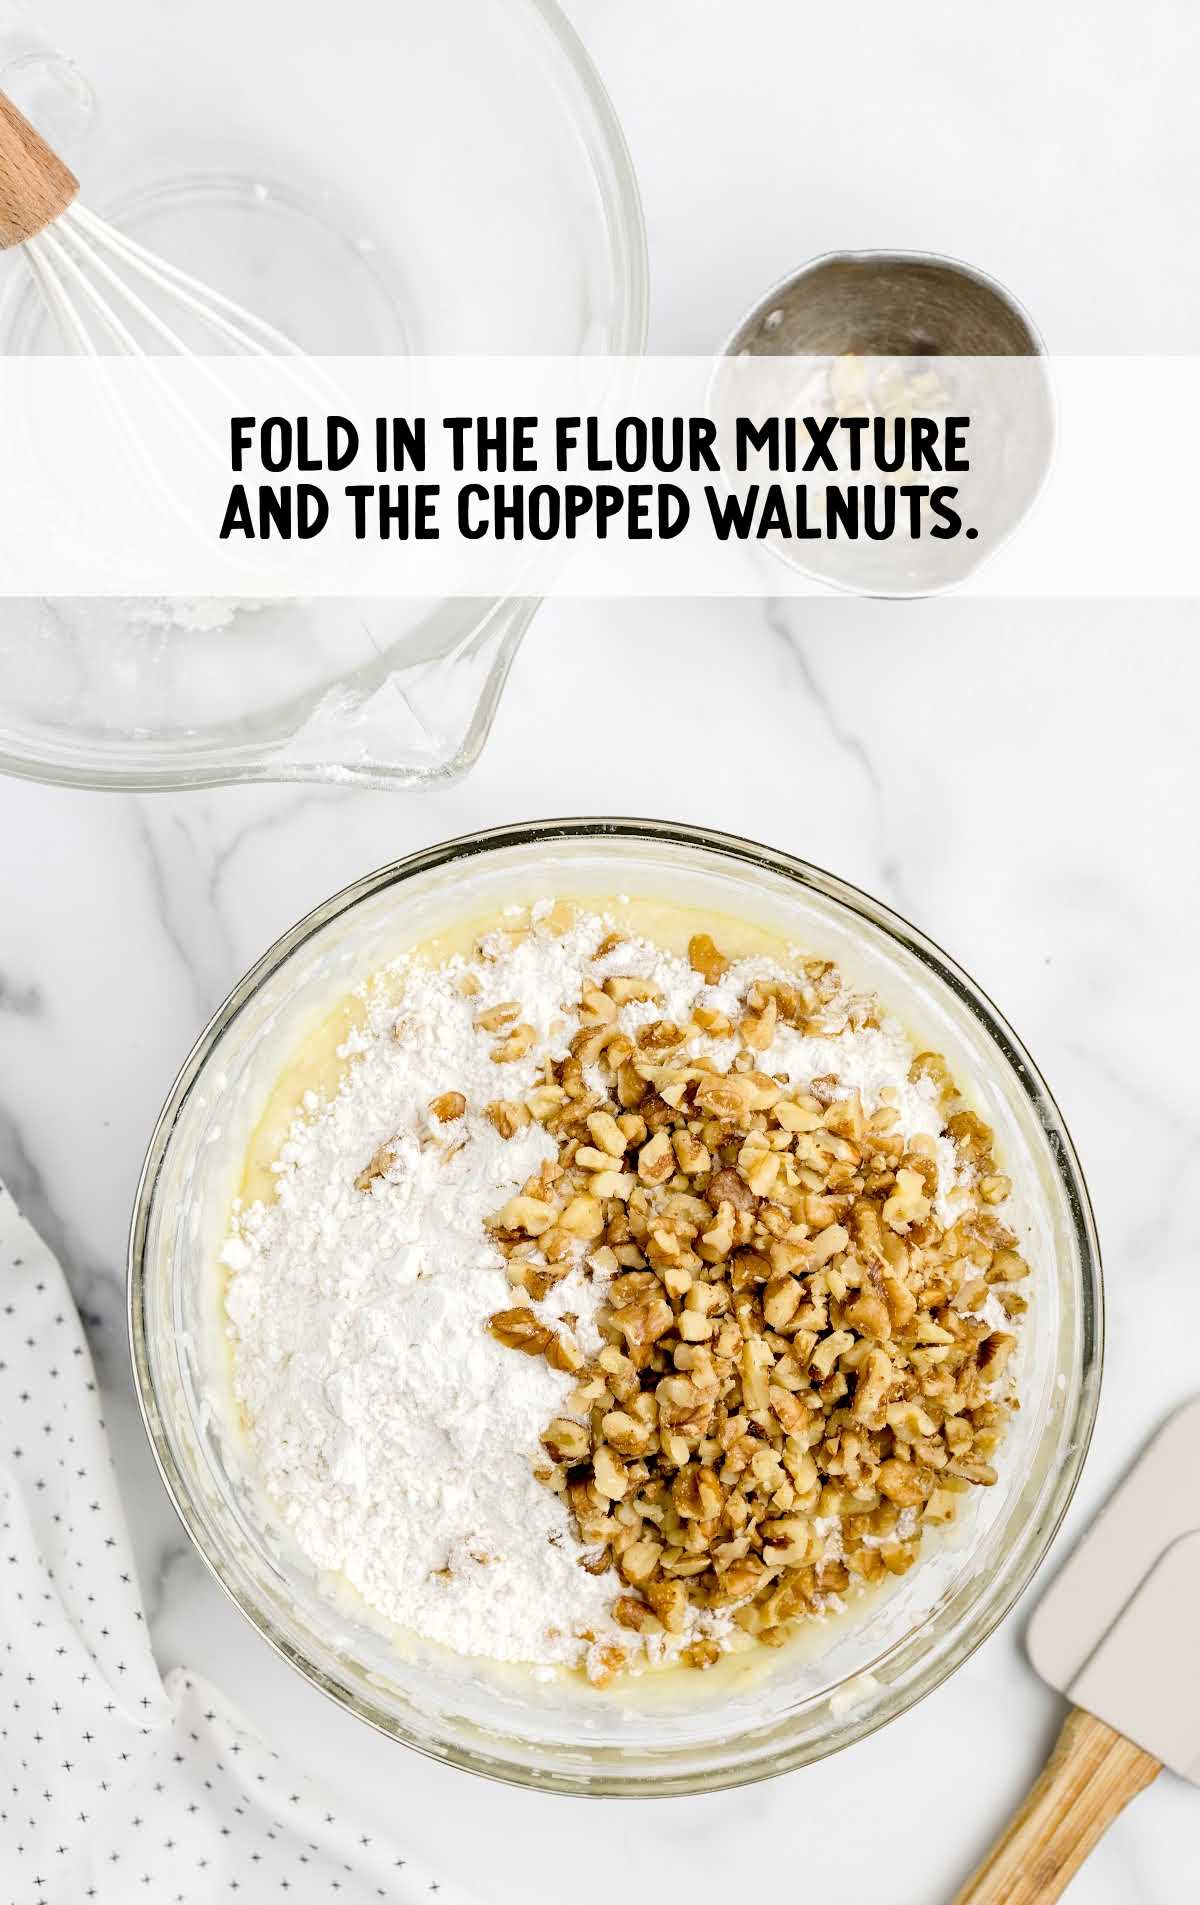 flour mixture added to the chopped walnuts in a bowl